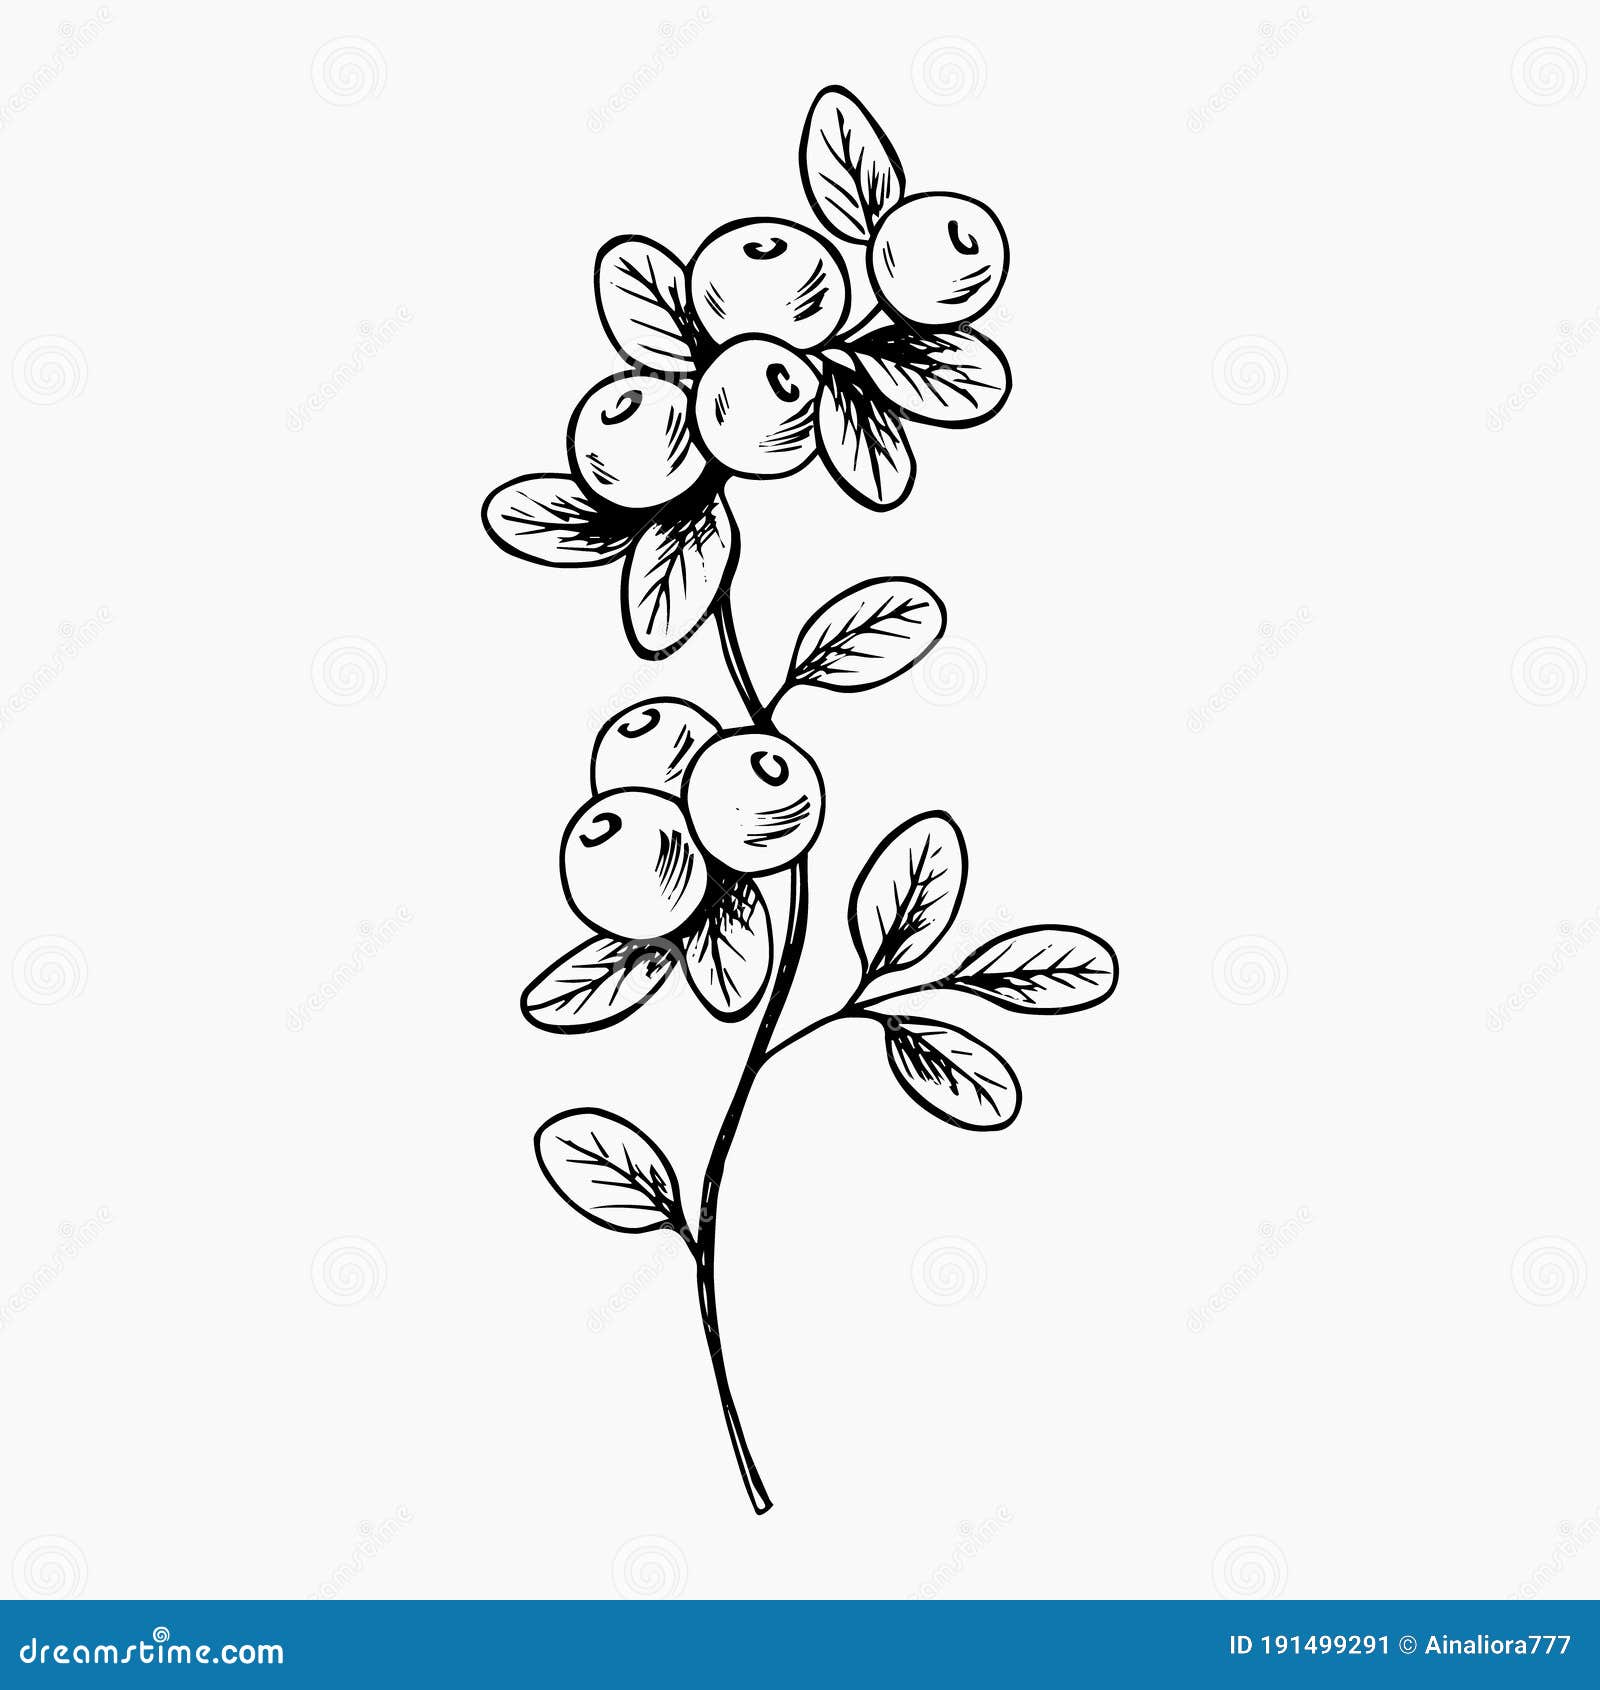 Hand drawn blueberry illustration  free image by rawpixelcom  How to draw  hands Illustration Free illustration images